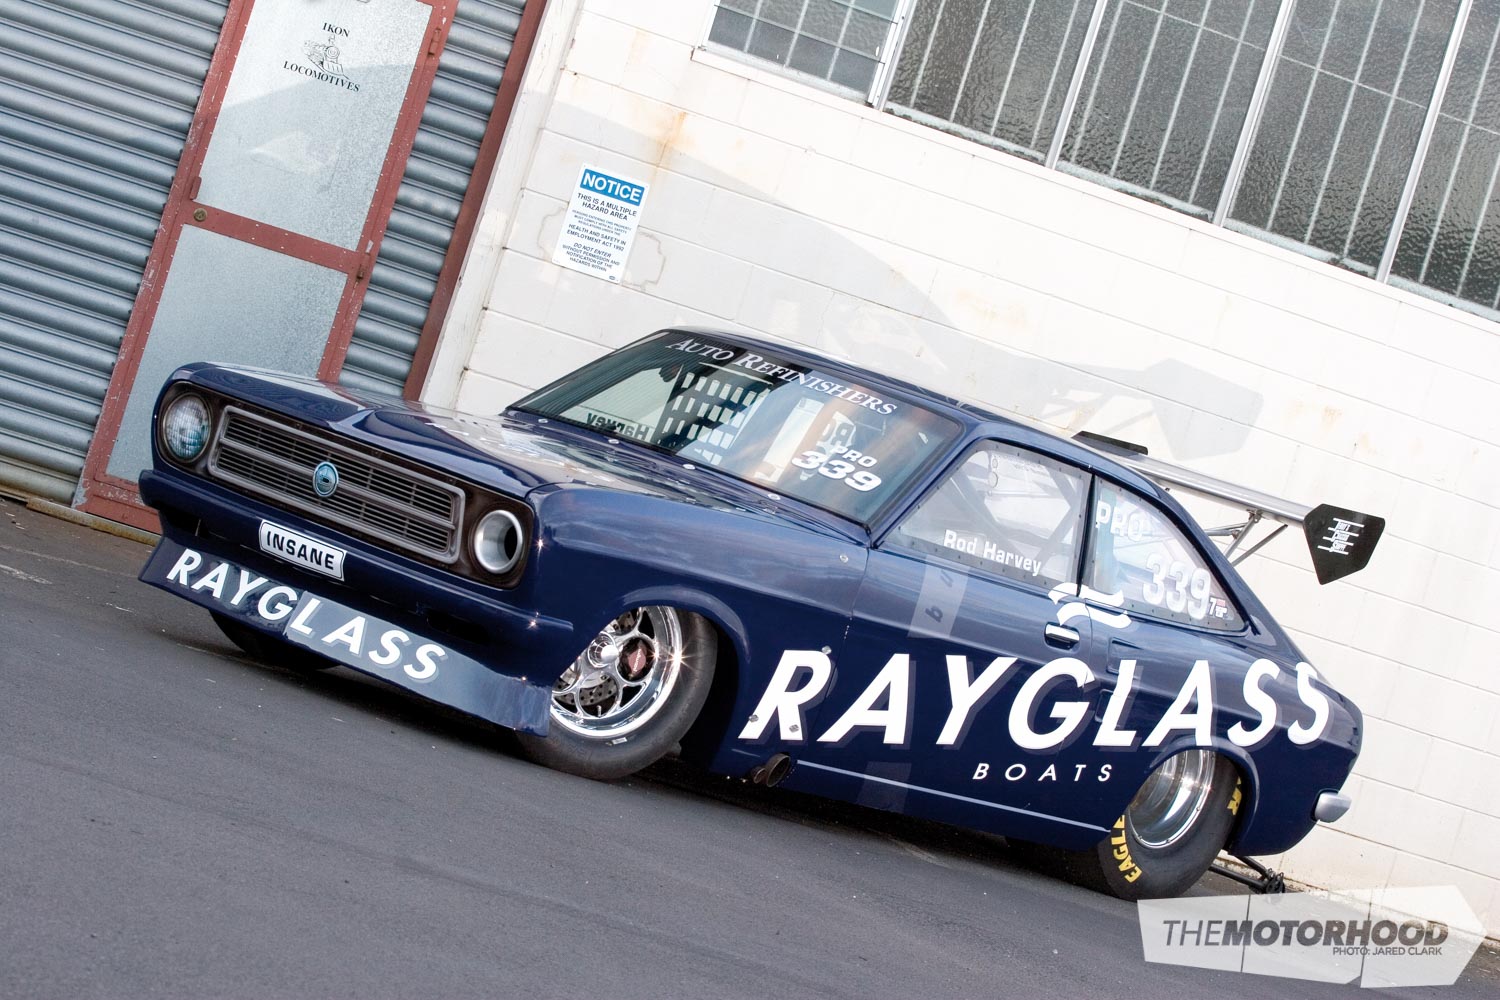 One of the team's first trips to Australia running the SR20-powered Datsun at the Brisbane Jamboree